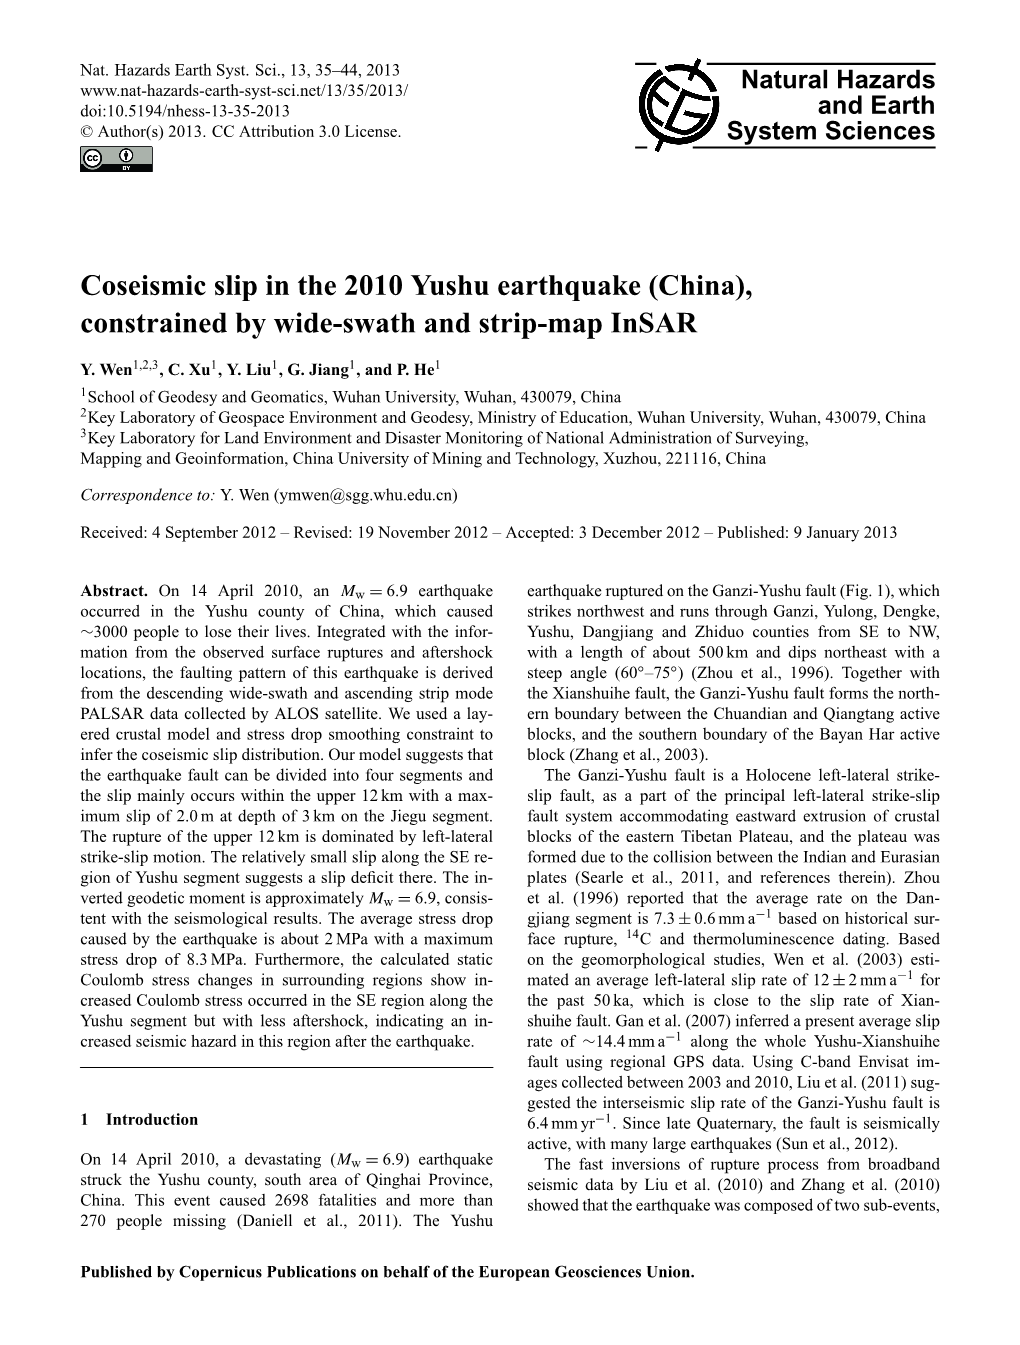 Coseismic Slip in the 2010 Yushu Earthquake (China), Constrained by Wide-Swath and Strip-Map Insar